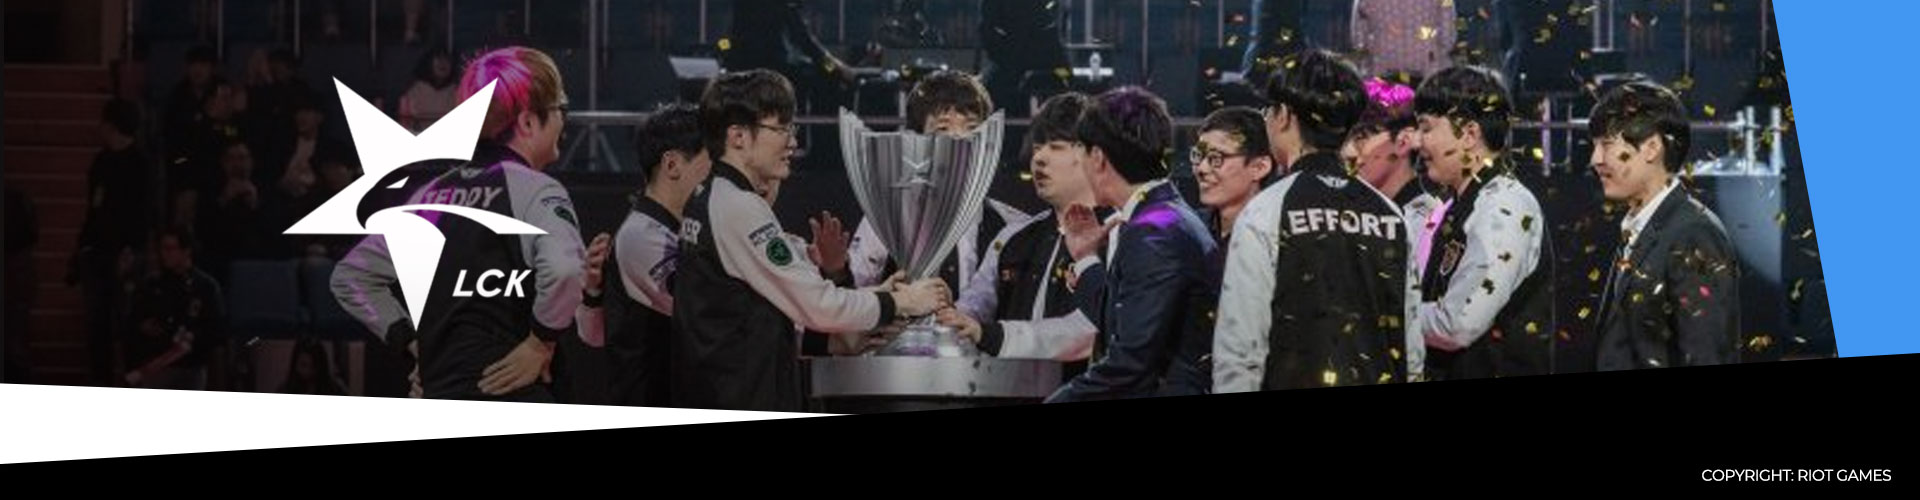 Power Rankings for LCK Spring 2020